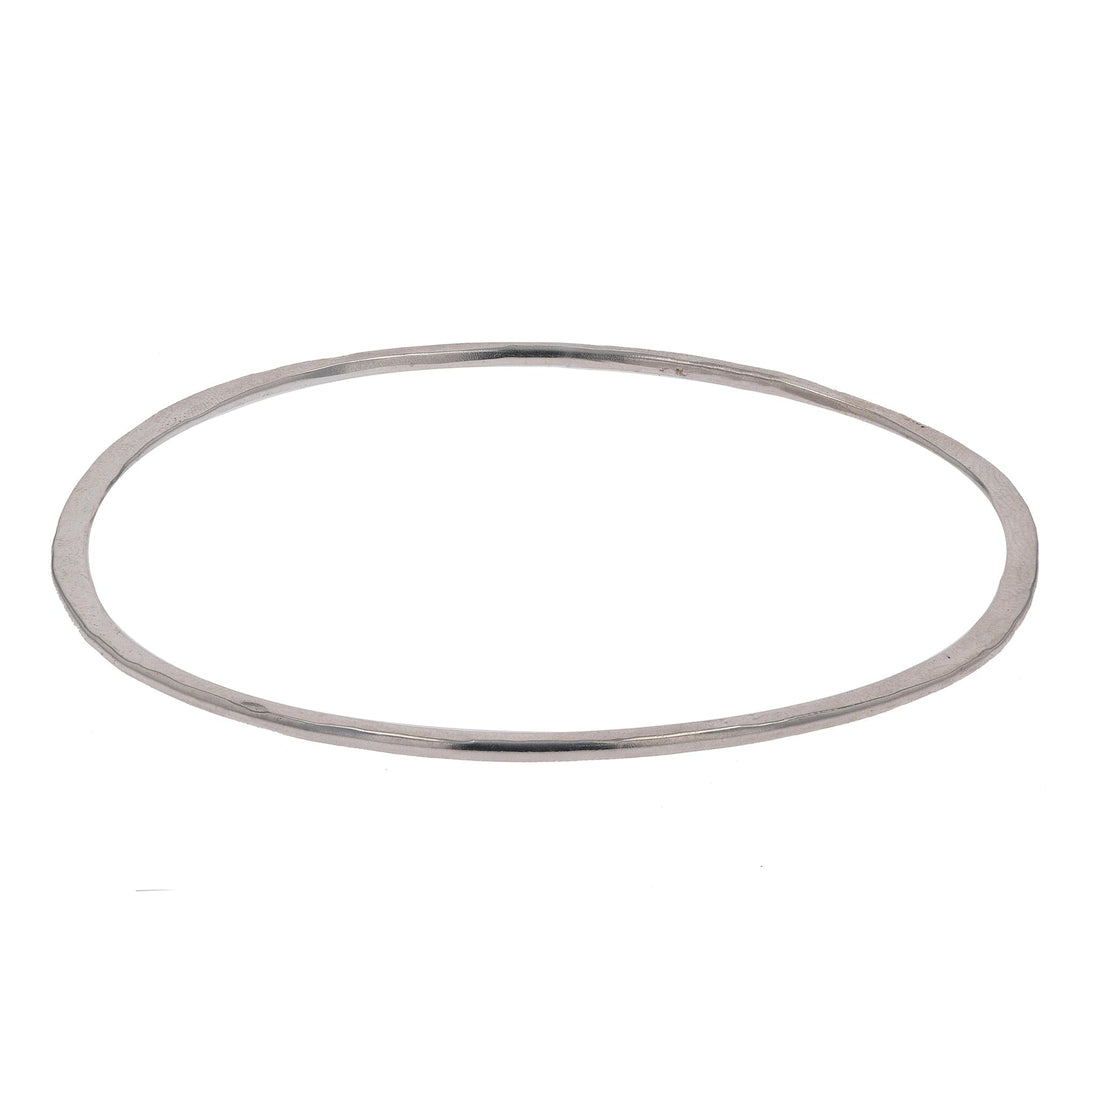 Sterling Silver Hammered Bangle by Arianna Nicolai - Skeie's Jewelers